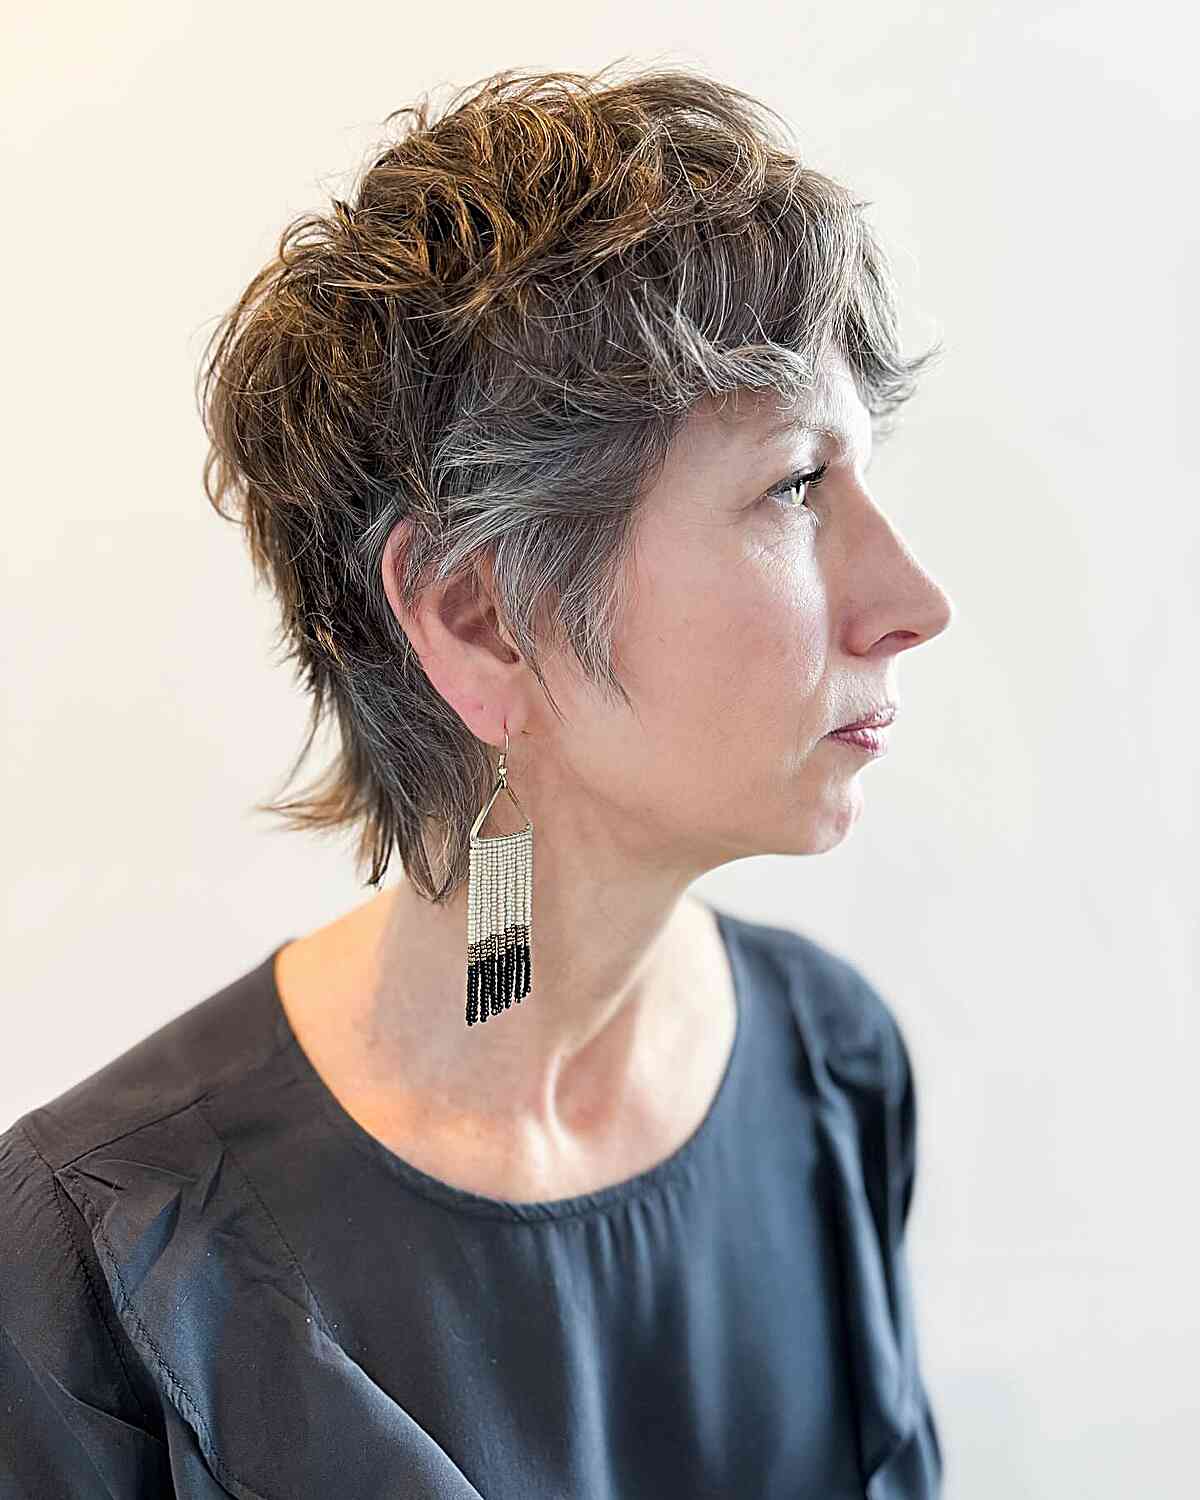 Long Jagged Pixie Haircut with Bangs for Mature Women